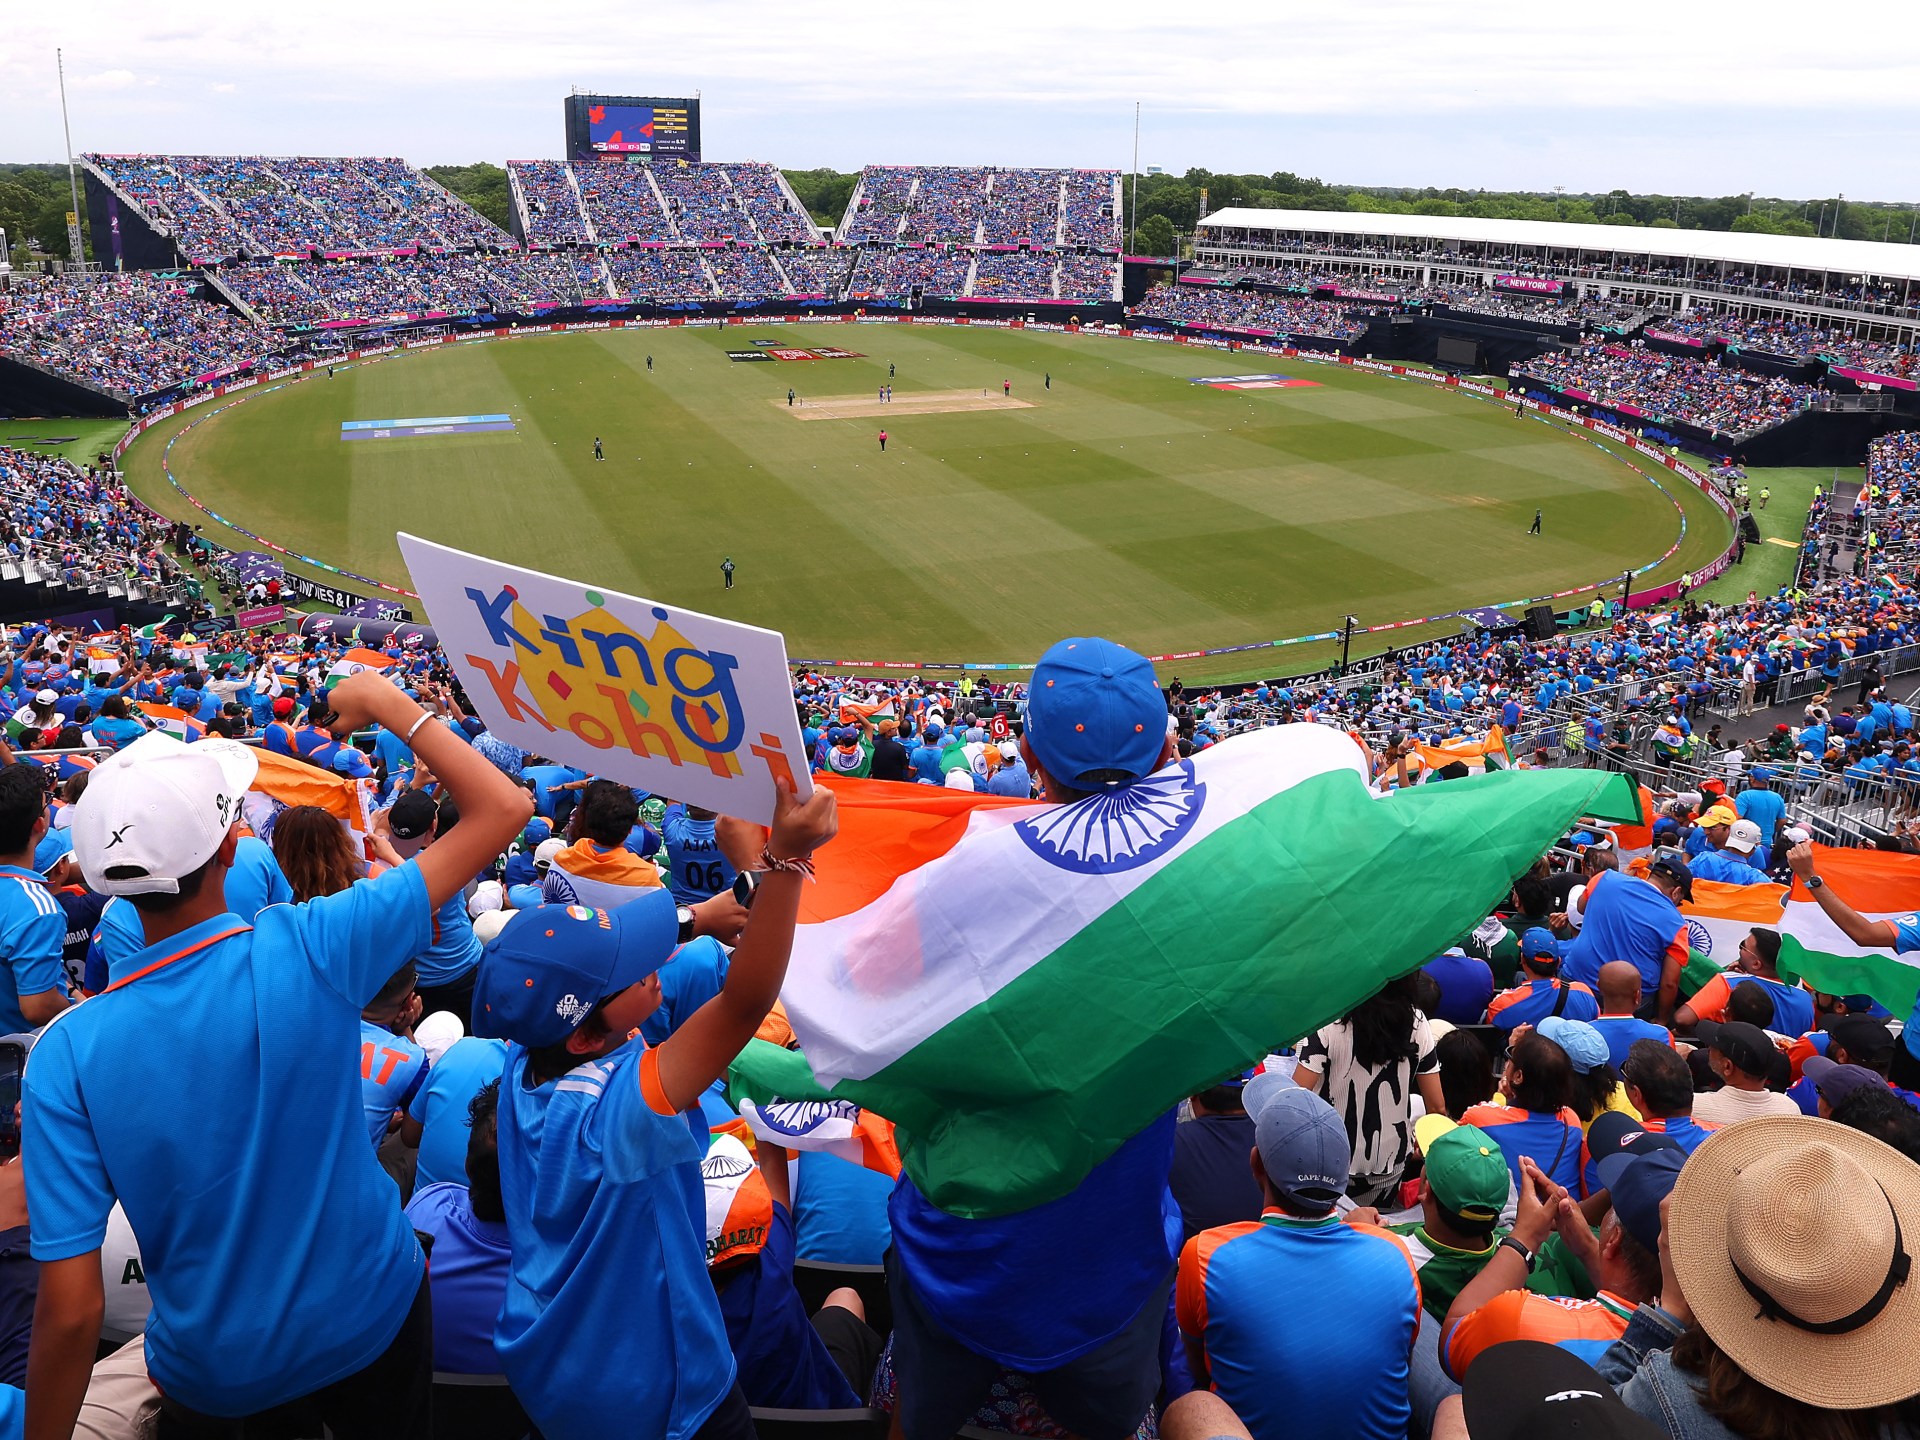 USA vs India How the home team could help convert Americans to cricket ICC Men's T20 World